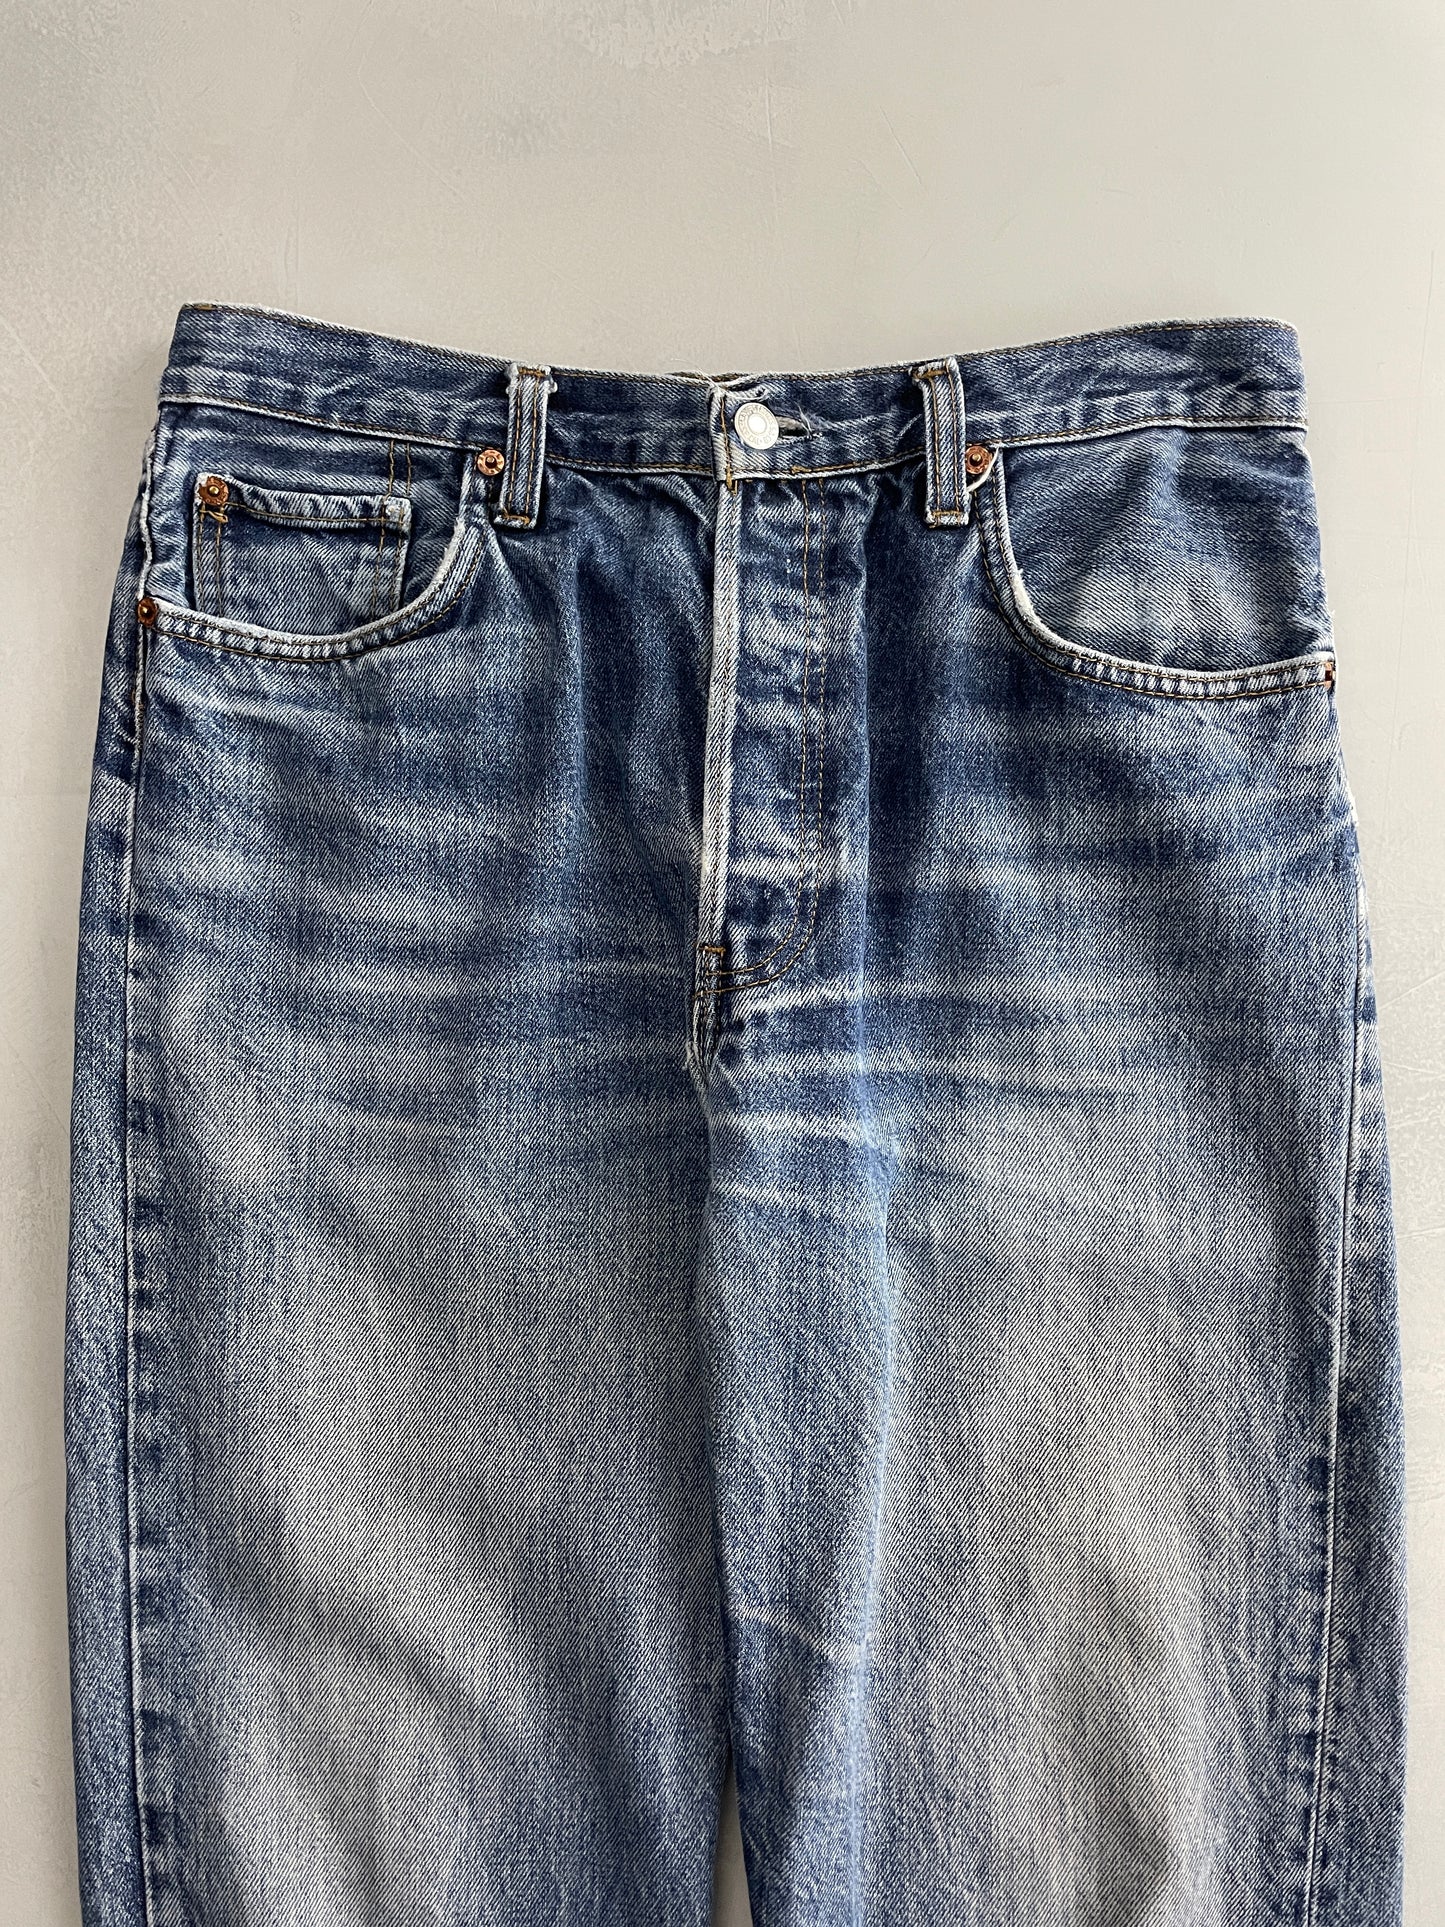 Made in USA Levi's 501's [32"]